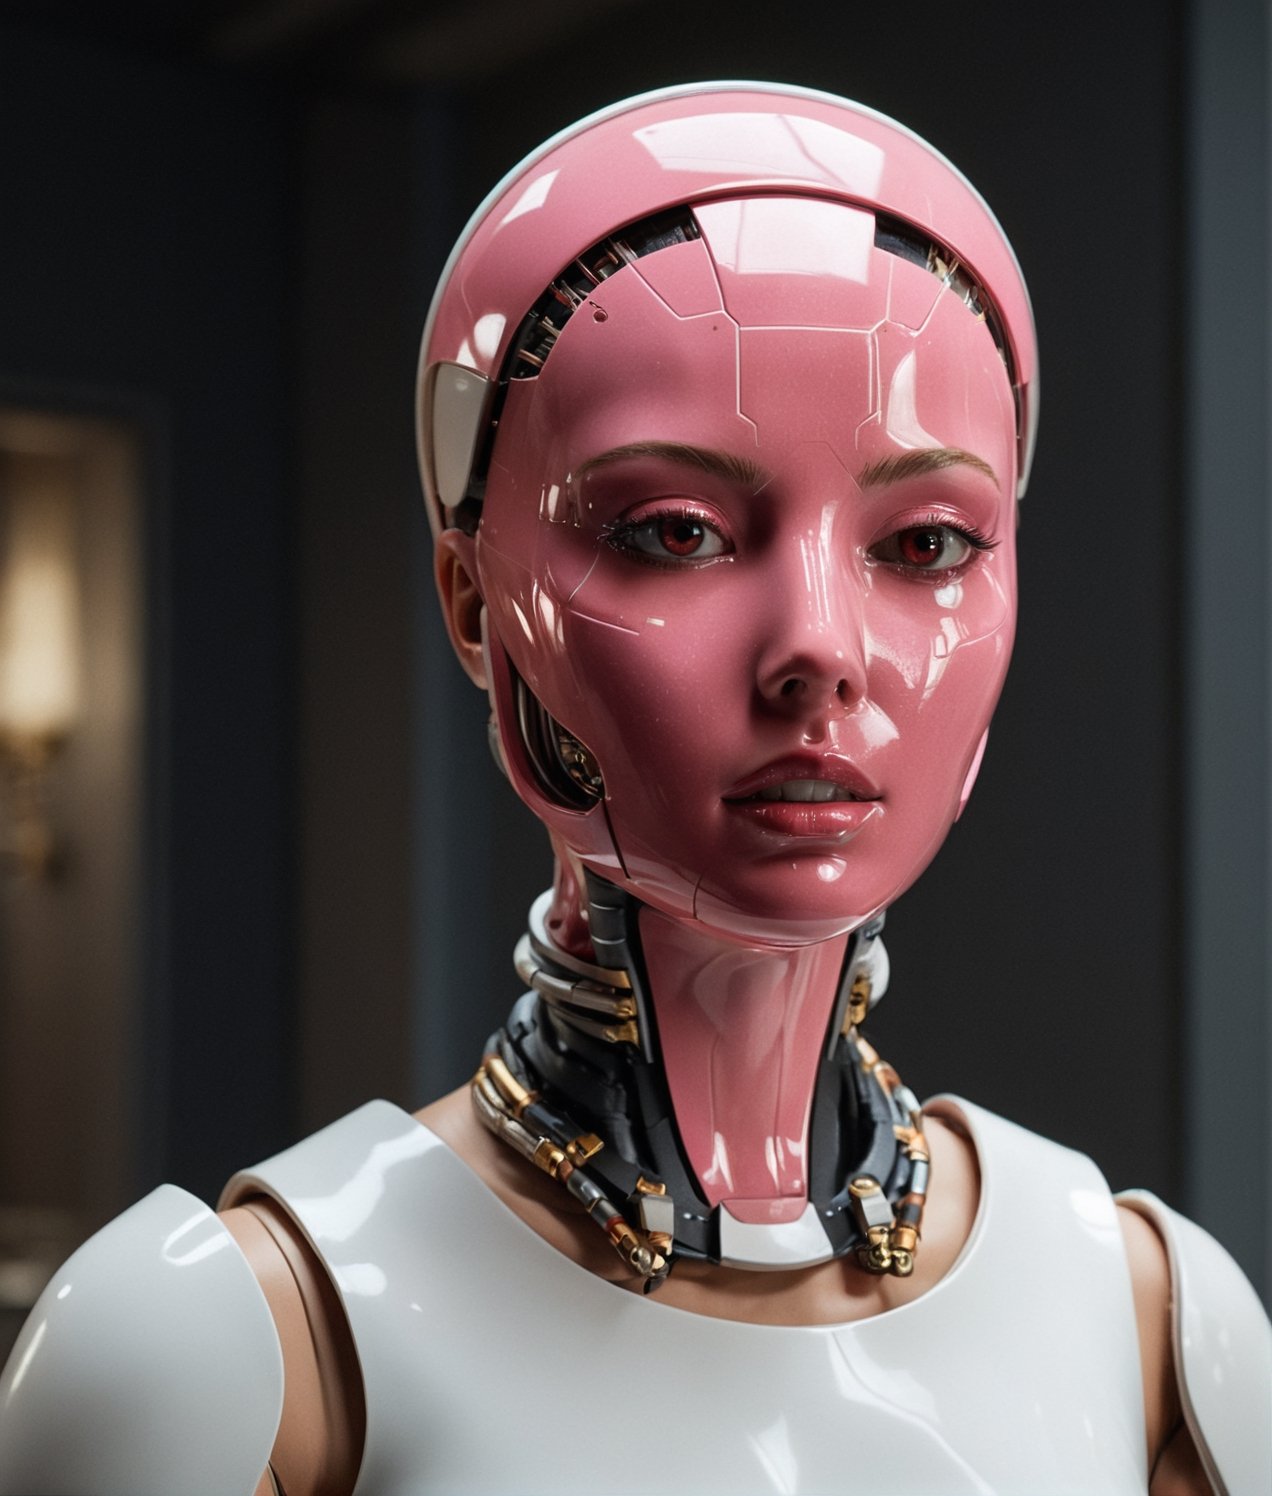 robot_domestic_vintage_maid_female_high-tech, futuristic:1.5, sci-fi:1.6, (garnet, pink and white color:1.9), (full body:1.9), sophisticated, ufo, ai, tech, unreal, luxurious, Advanced technology of a Type V, epic high-living_room back ground PNG image format, sharp lines and borders, solid blocks of colors, over 300ppp dots per inch, 32k ultra high definition, 530MP, Fujifilm XT3, cinematographic, (photorealistic:1.6), 4D, High definition RAW color professional photos, photo, masterpiece, realistic, ProRAW, realism, photorealism, high contrast, digital art trending on Artstation ultra high definition detailed realistic, detailed, skin texture, hyper detailed, realistic skin texture, facial features, armature, best quality, ultra high res, high resolution, detailed, raw photo, sharp re, lens rich colors hyper realistic lifelike texture dramatic lighting unrealengine trending, ultra sharp, pictorial technique, (sharpness, definition and photographic precision), (contrast, depth and harmonious light details), (features, proportions, colors and textures at their highest degree of realism), (blur background, clean and uncluttered visual aesthetics, sense of depth and dimension, professional and polished look of the image), work of beauty and complexity. perfectly symmetrical face. (aesthetic + beautiful + harmonic:1.5),  (ultra detailed background, ultra detailed scenery:1.5), JuggerCineXL2:0.9, detail_master_XL:0.9, detailmaster2.0:0.9, perfecteyes-000007:1.3,DonMWr41thXL, more detail ,Movie Still